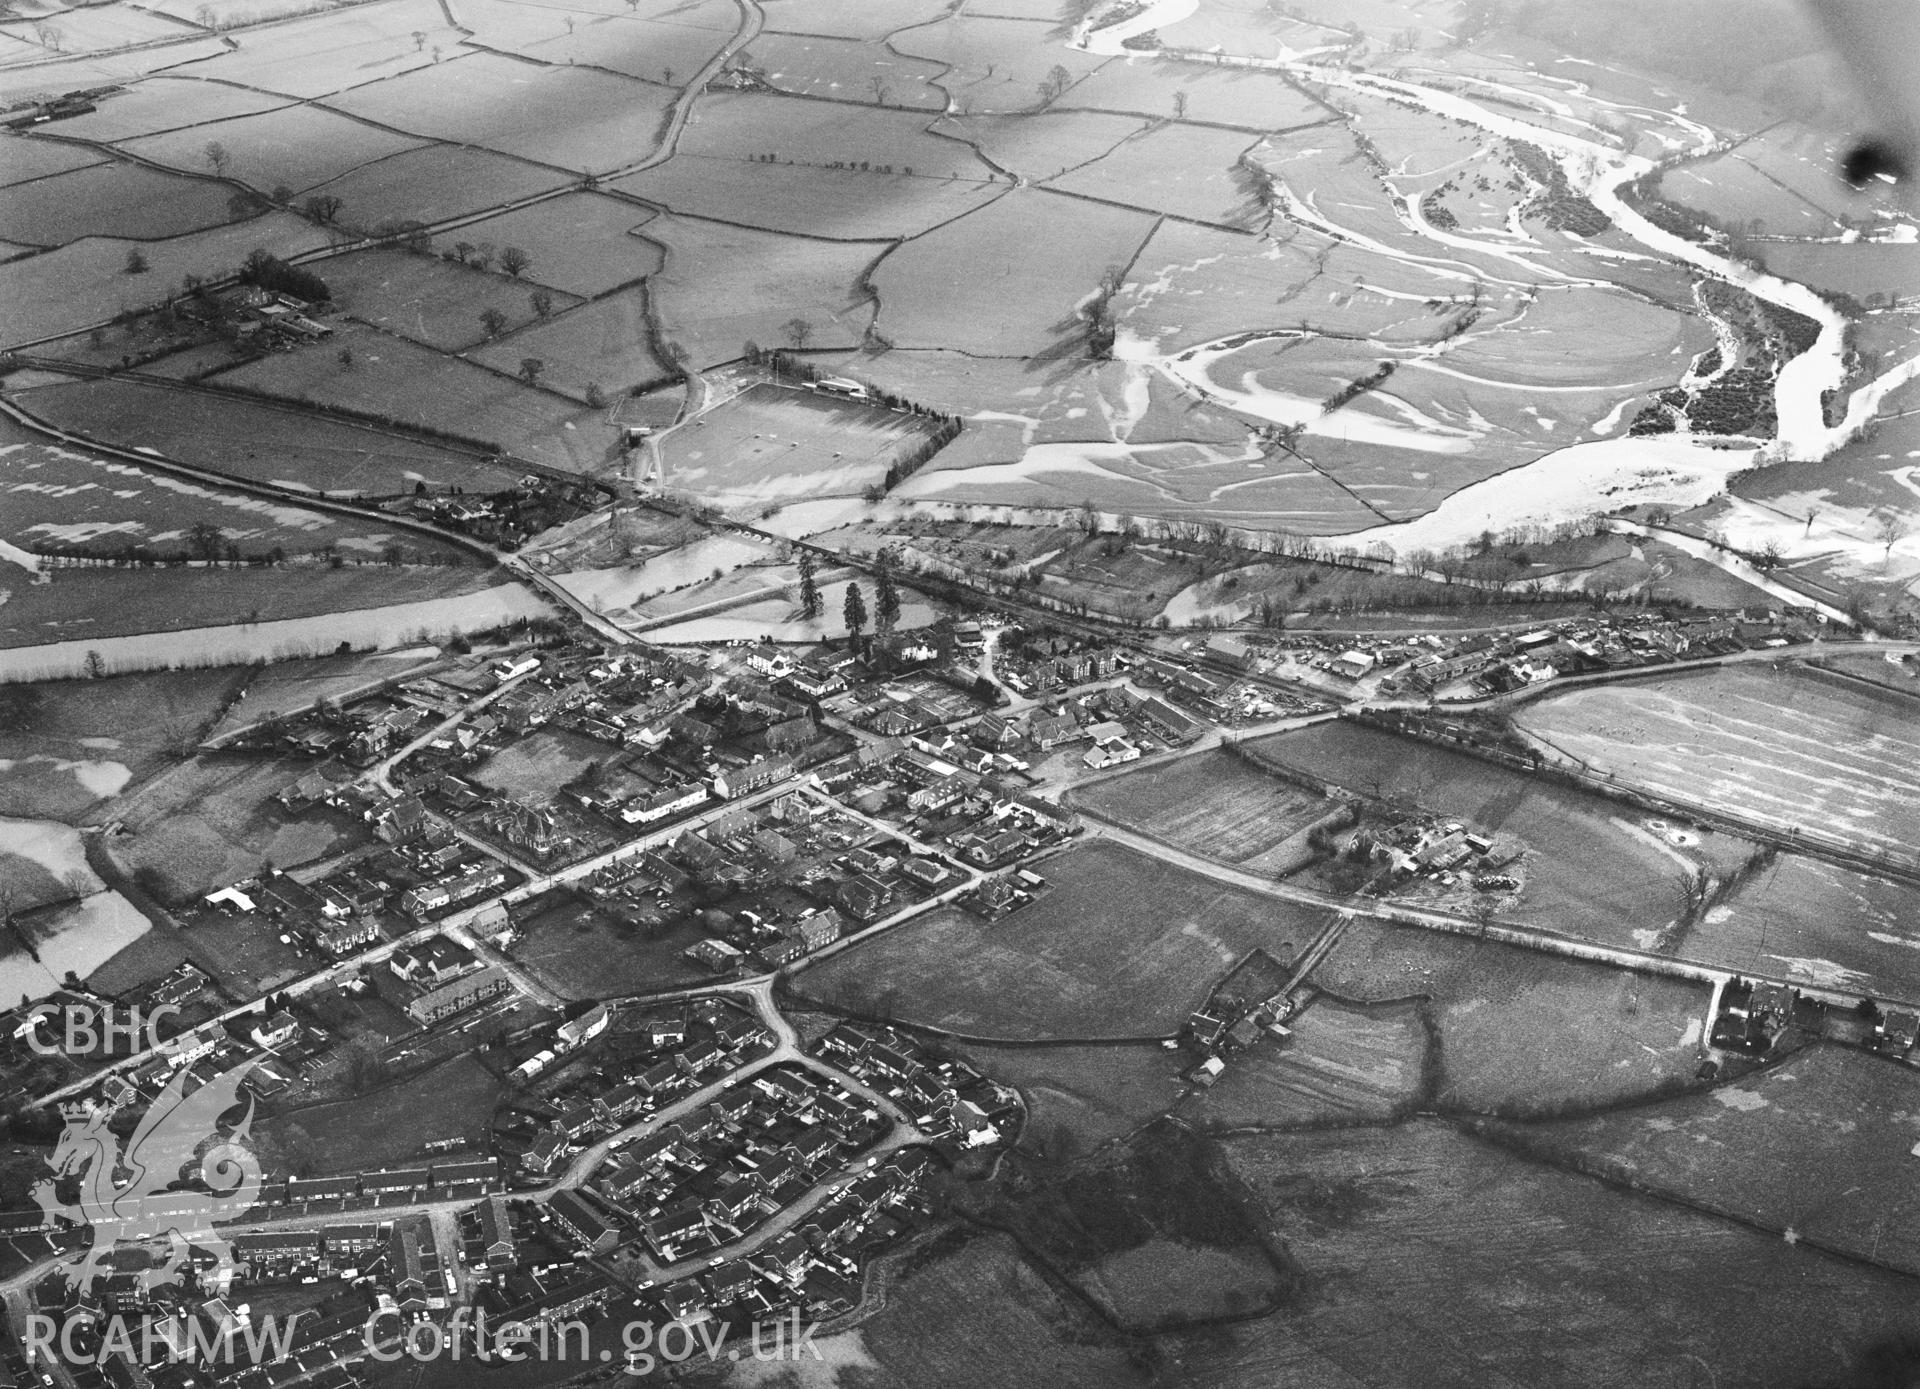 RCAHMW Black and white oblique aerial photograph of Caersws, Caersws, taken by C.R. Musson, 23/01/94